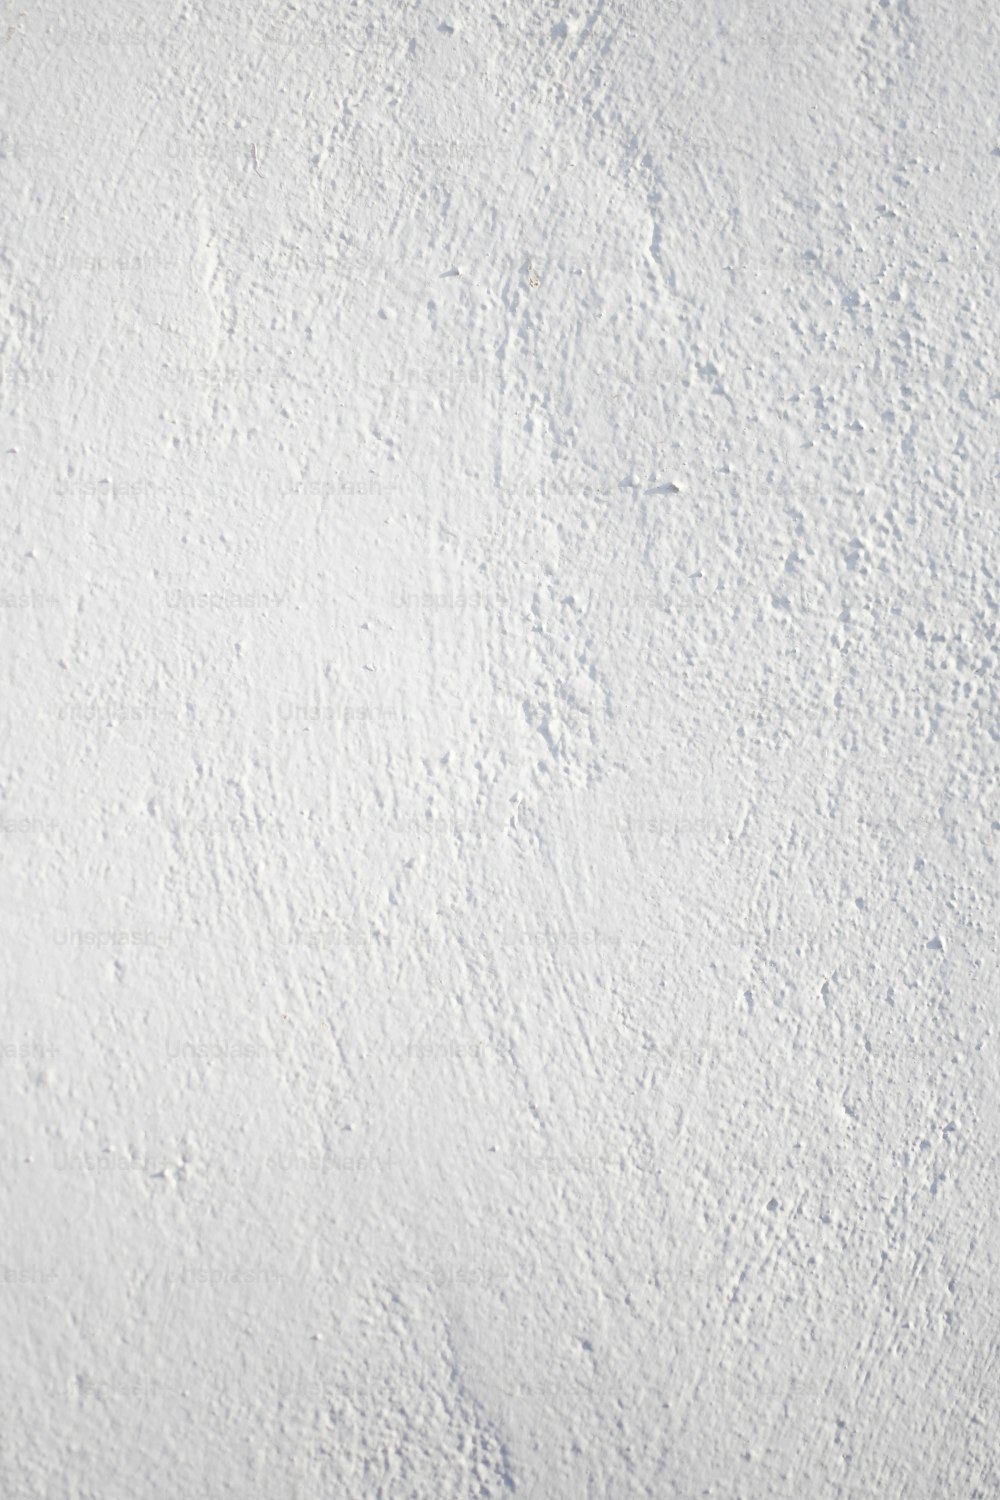 a white surface with cracks